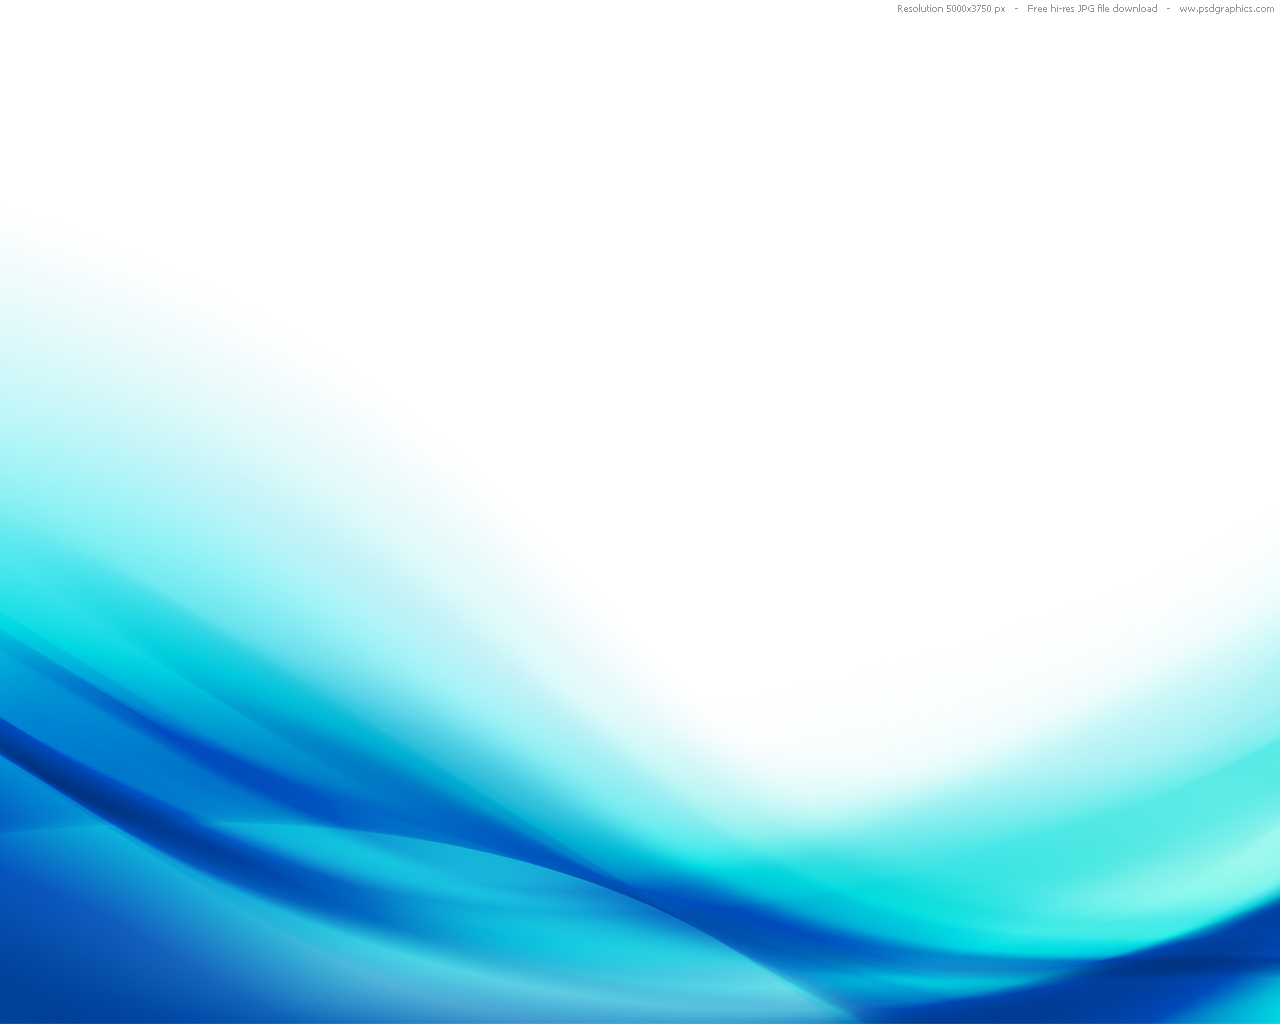 Abstract Backgrounds 1852 Hd Wallpapers in Abstract   Imagescicom